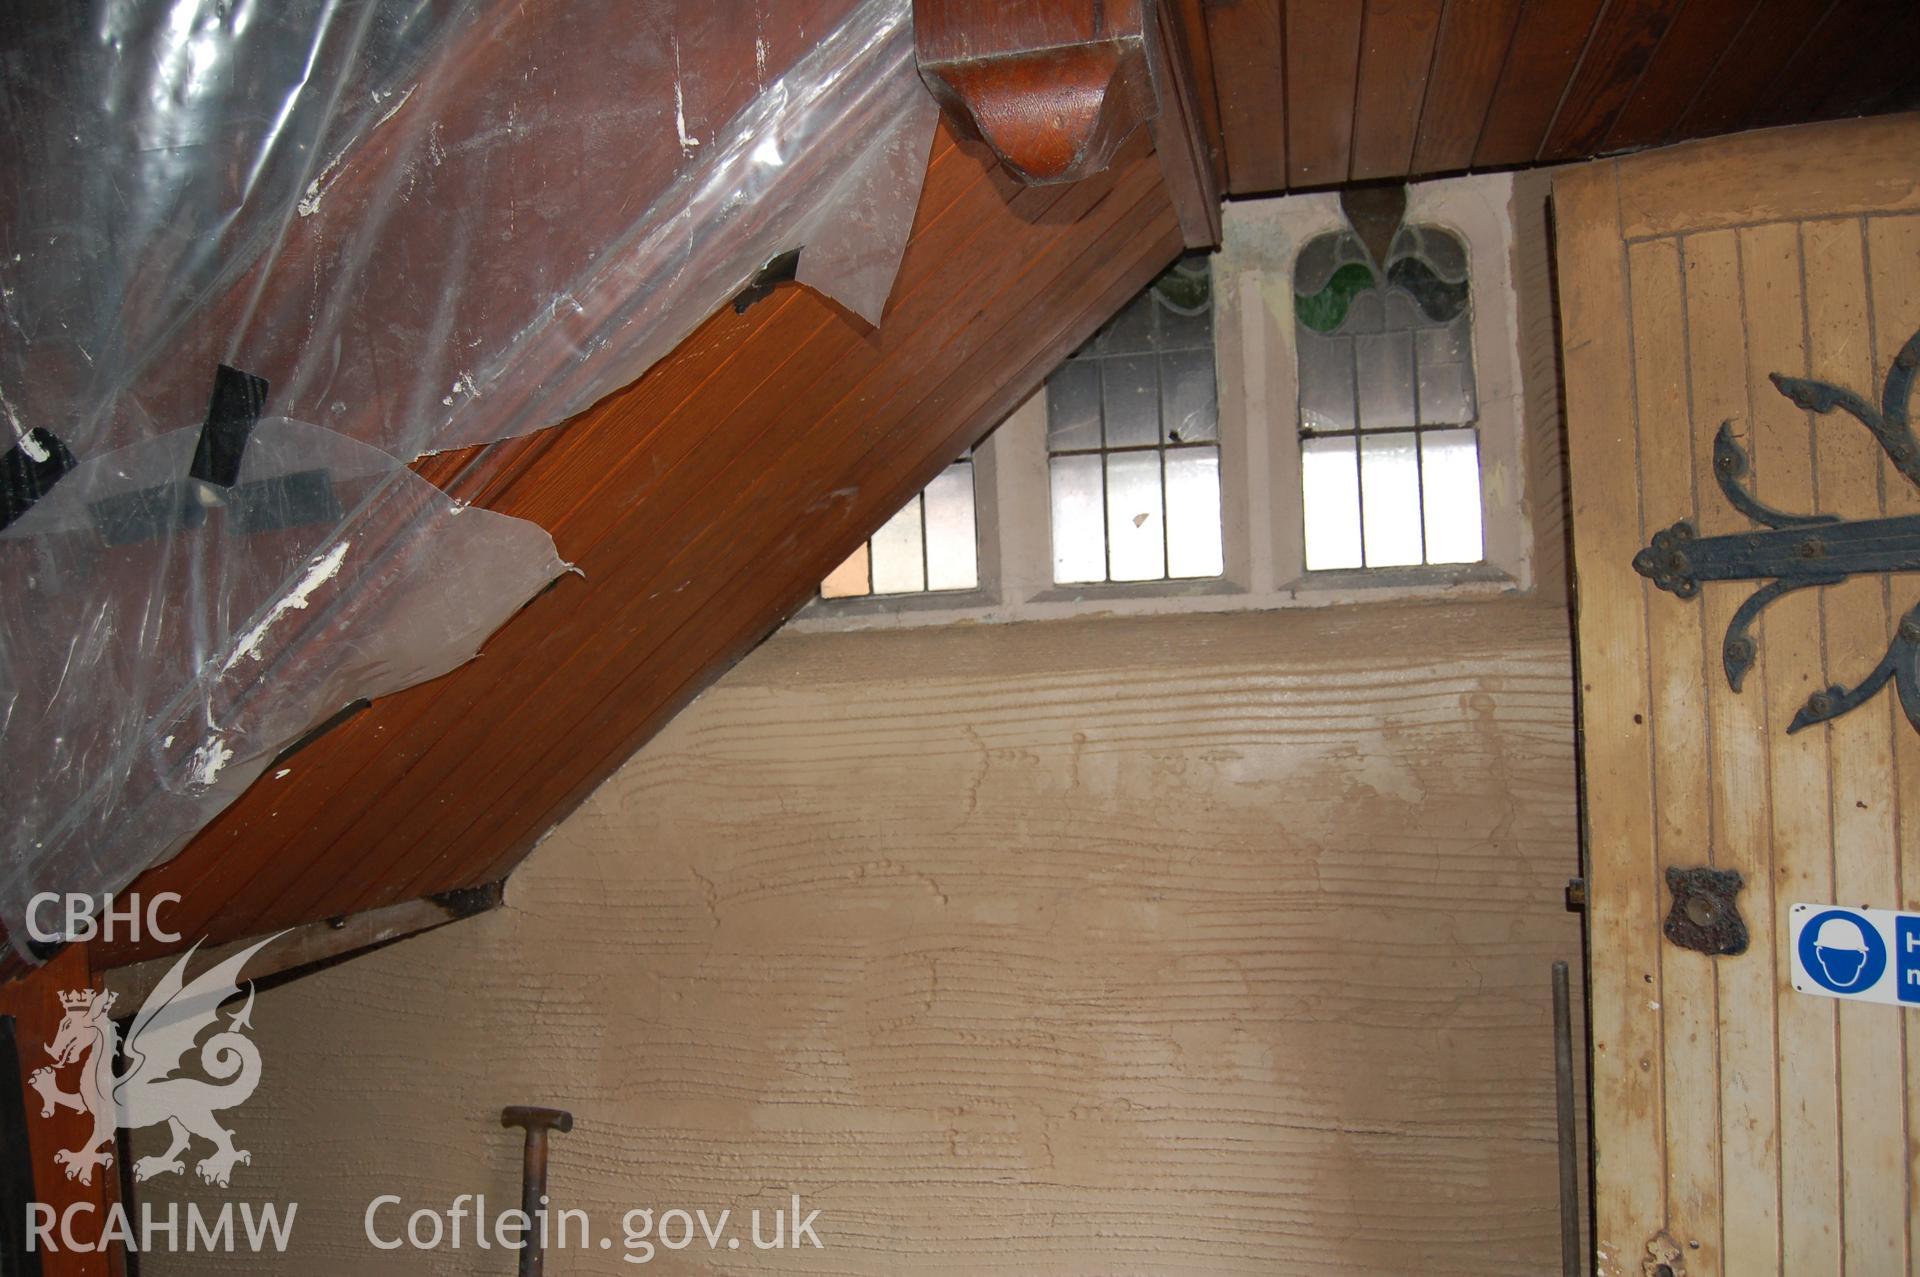 Digital colour photograph showing an interior room at the Van Road United Reformed Church, during renovation.